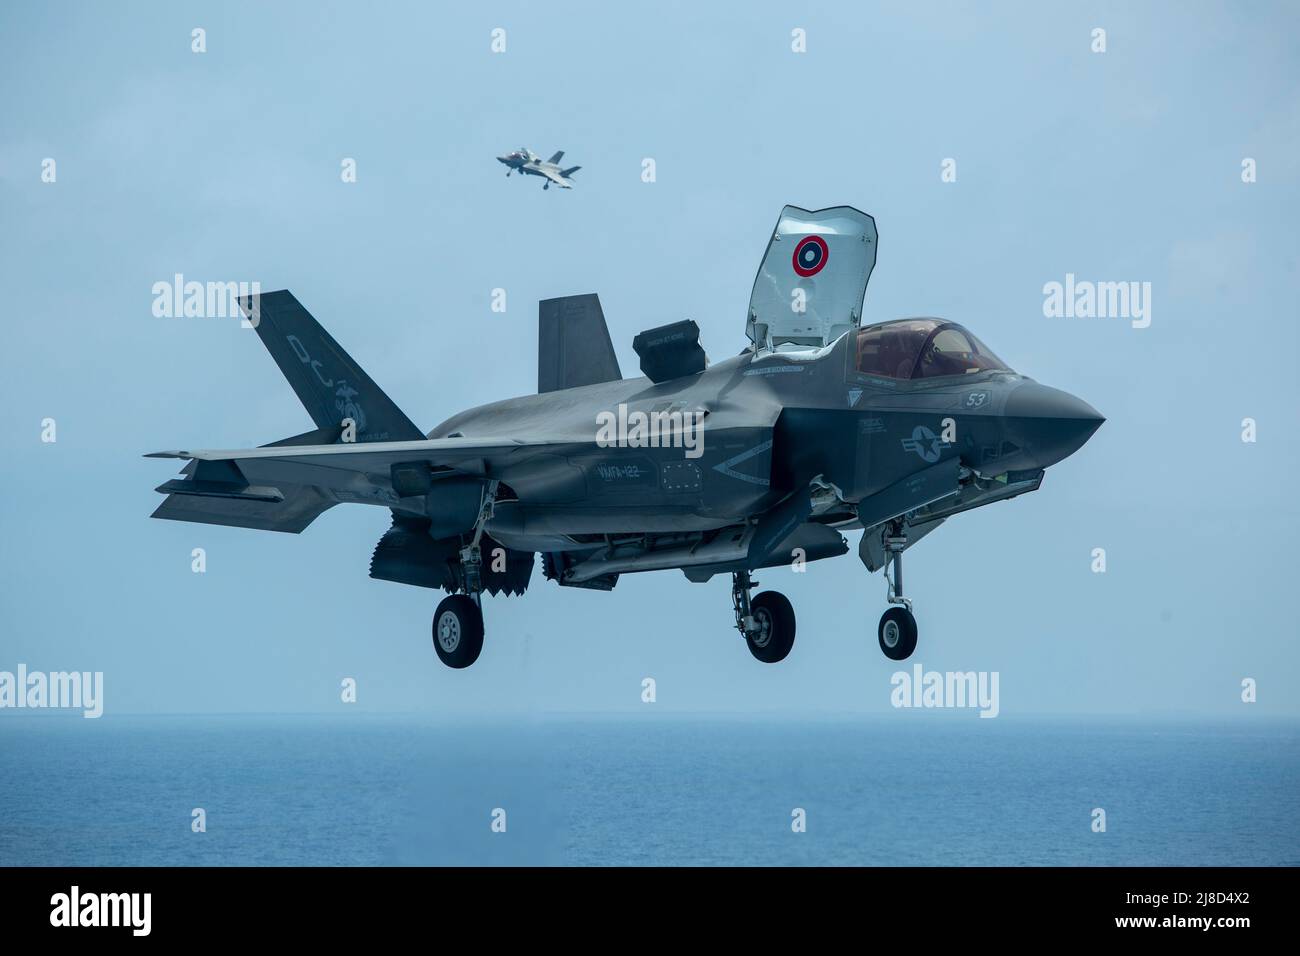 U.S. Marine Corps F-35B Lightning II fighter aircraft, attached to the Knightriders of Marine Medium Tiltrotor Squadron 164, approach for a vertical landing on the flight deck of the Wasp-class amphibious assault ship USS Makin Island, April 8, 2021 operating on the South China Sea. Stock Photo